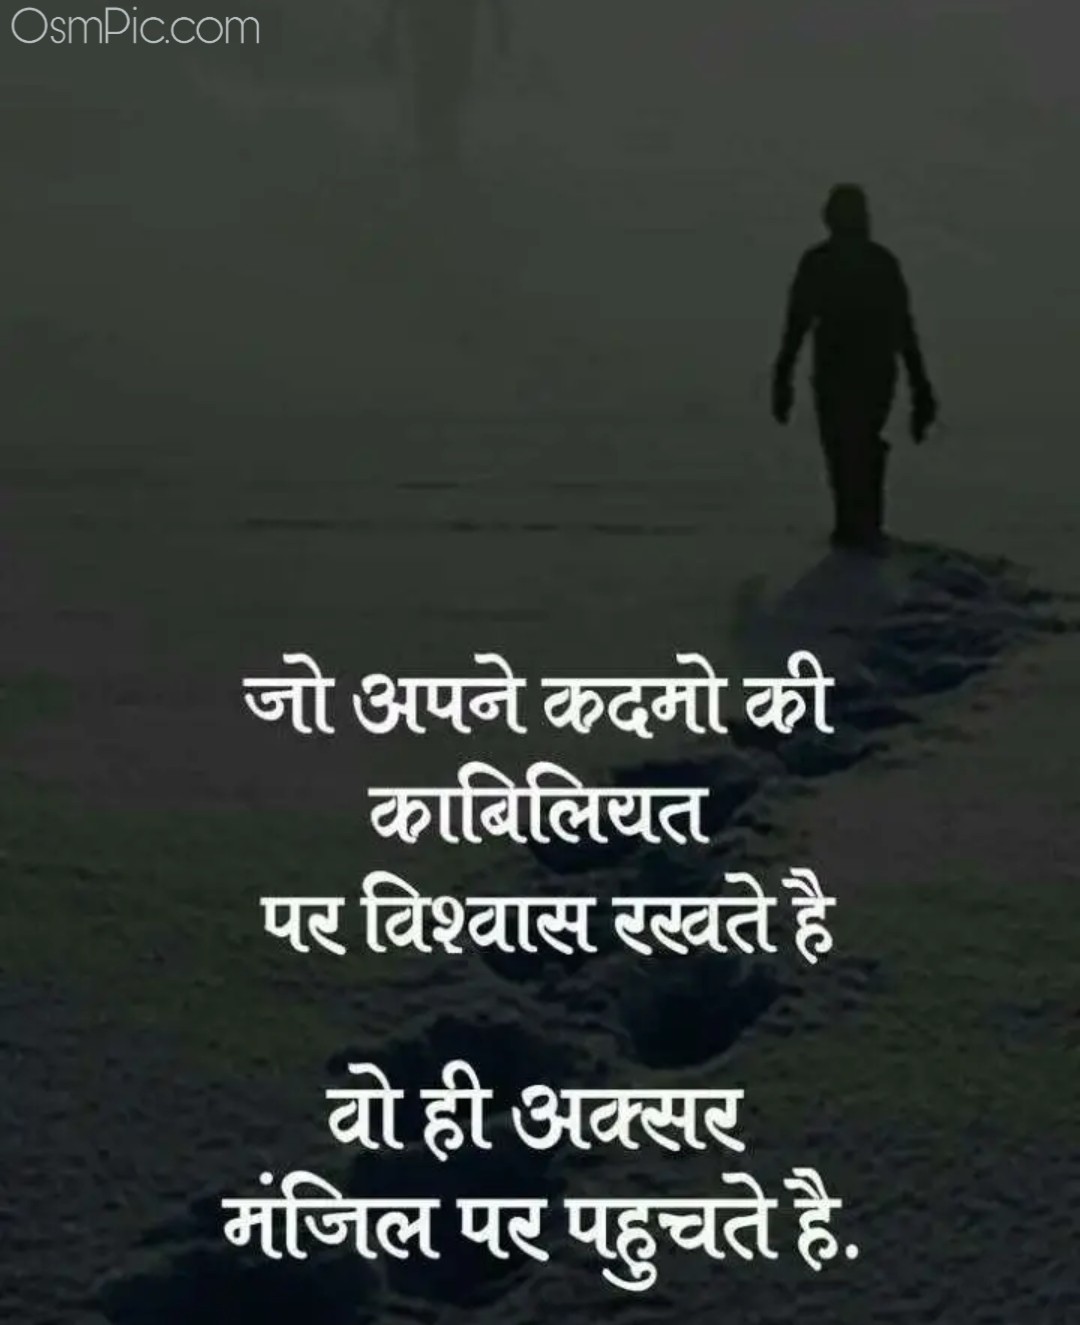 Top 50 Hindi Motivational Thoughts Pictures Quotes Images For Success